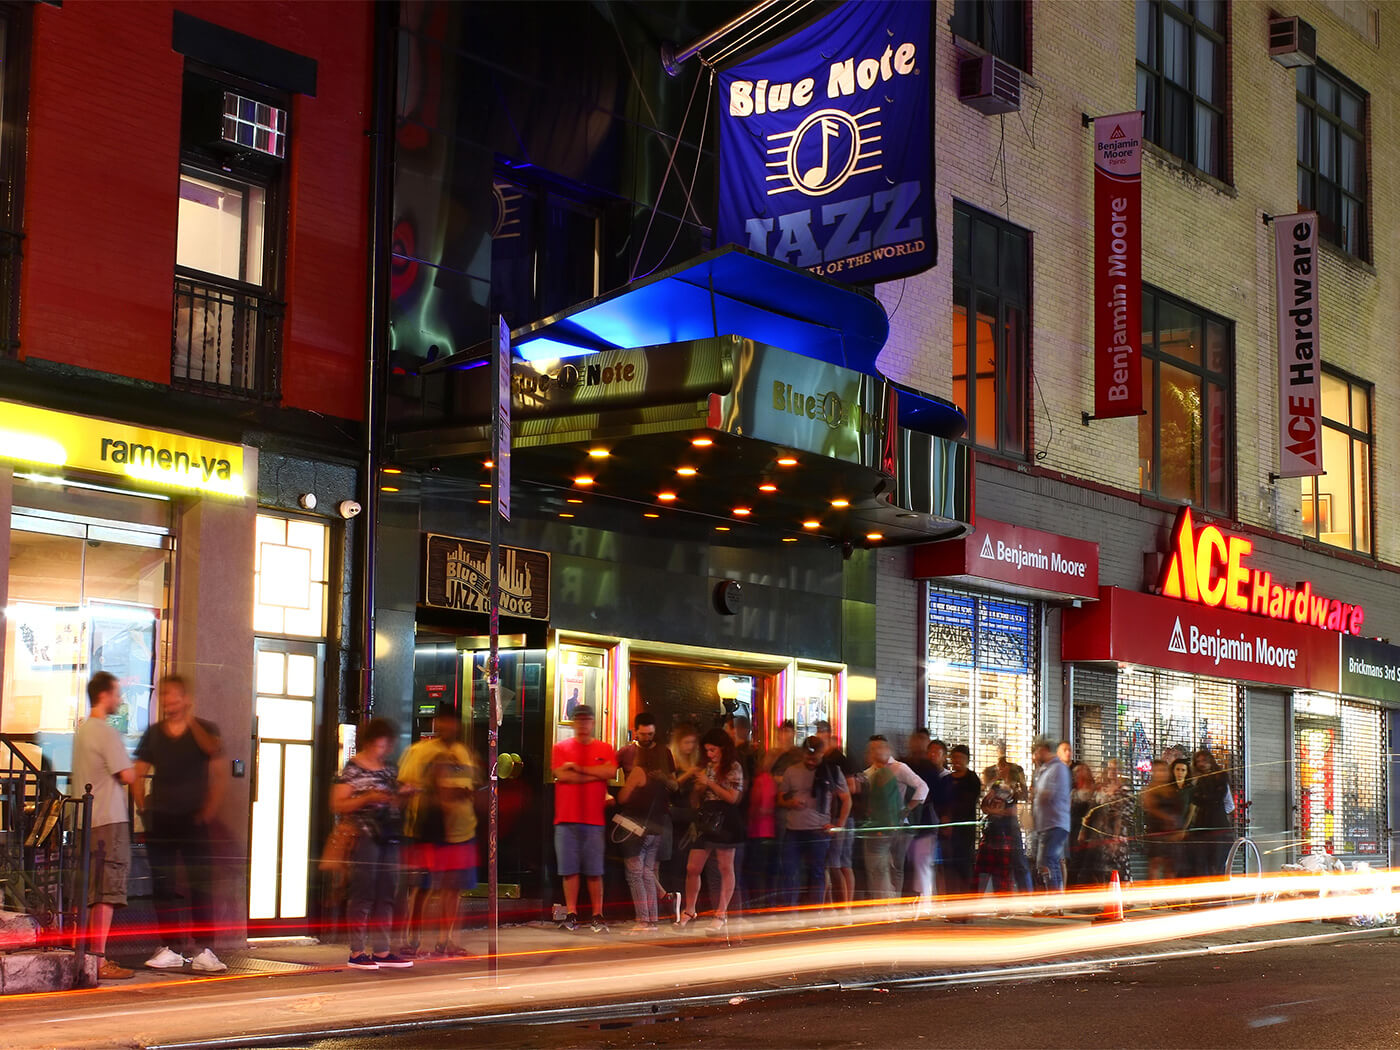 The Blue Note in New York